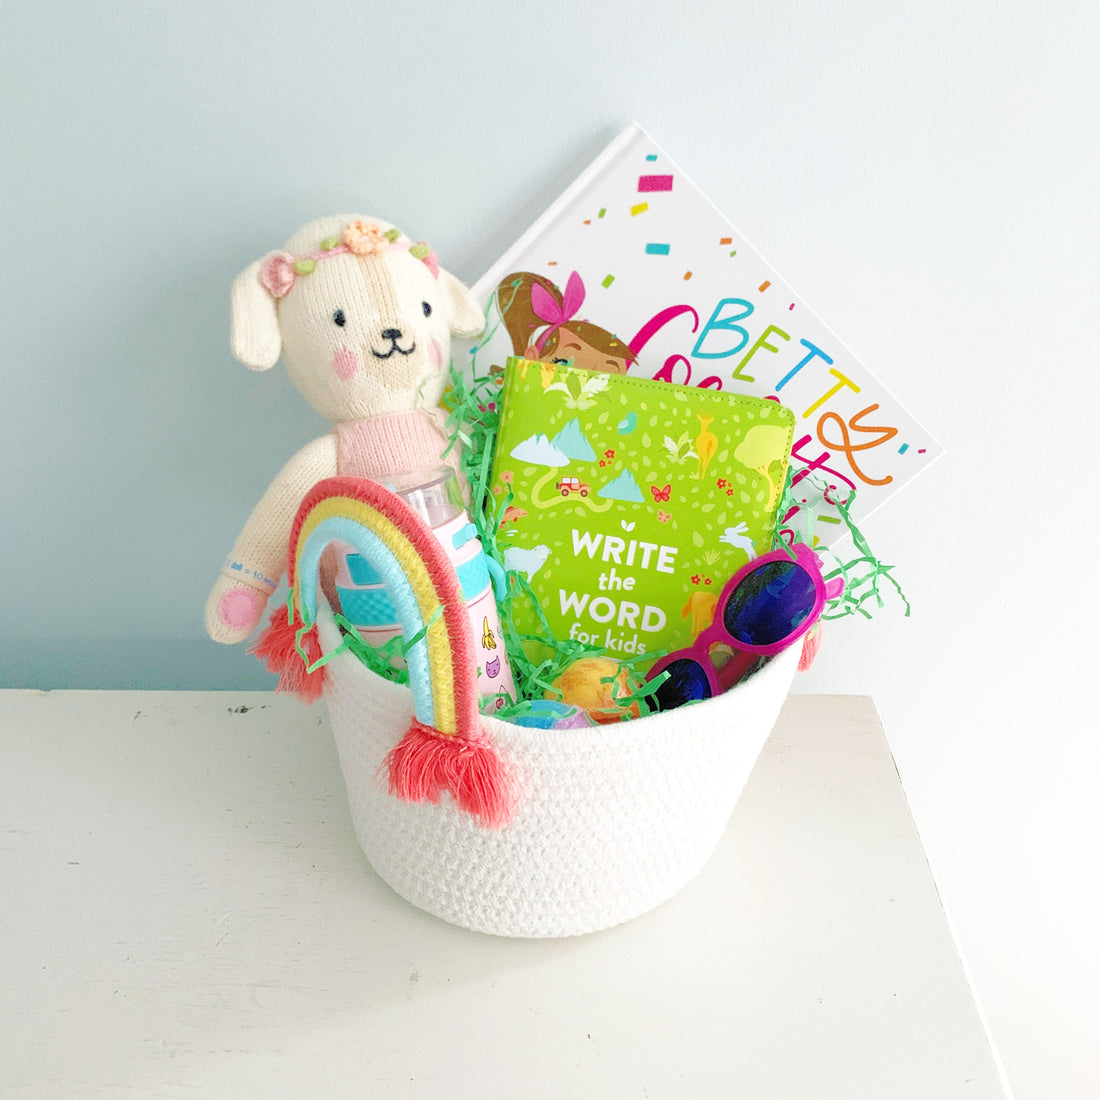 Our Favorite Easter Basket Picks from Small Businesses